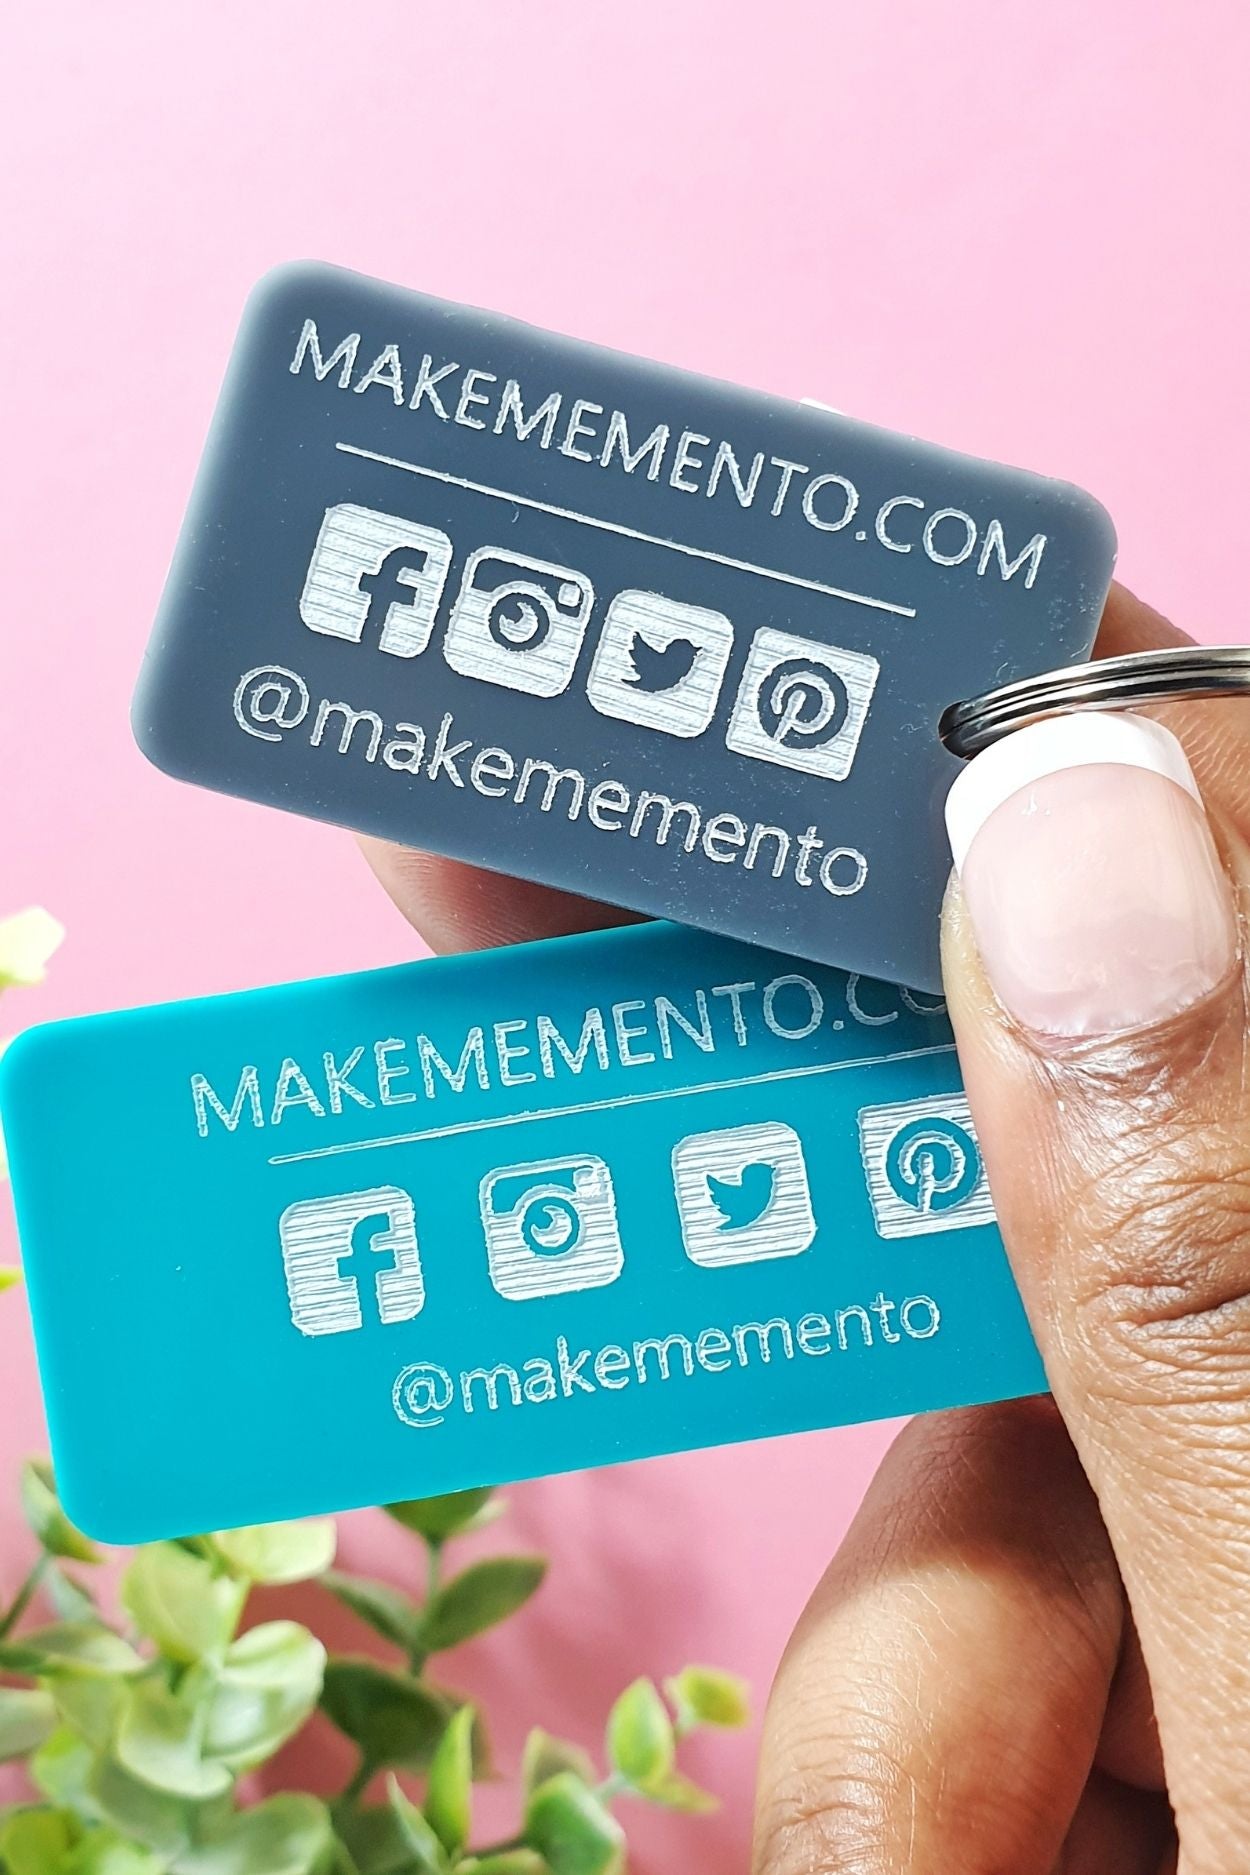 How_Businesses_Use_Branded_Keyrings_to_Connect_with_Customers_I_Make_Memento_6a18bcf4-cb1f-4ad2-a221-2df882793151